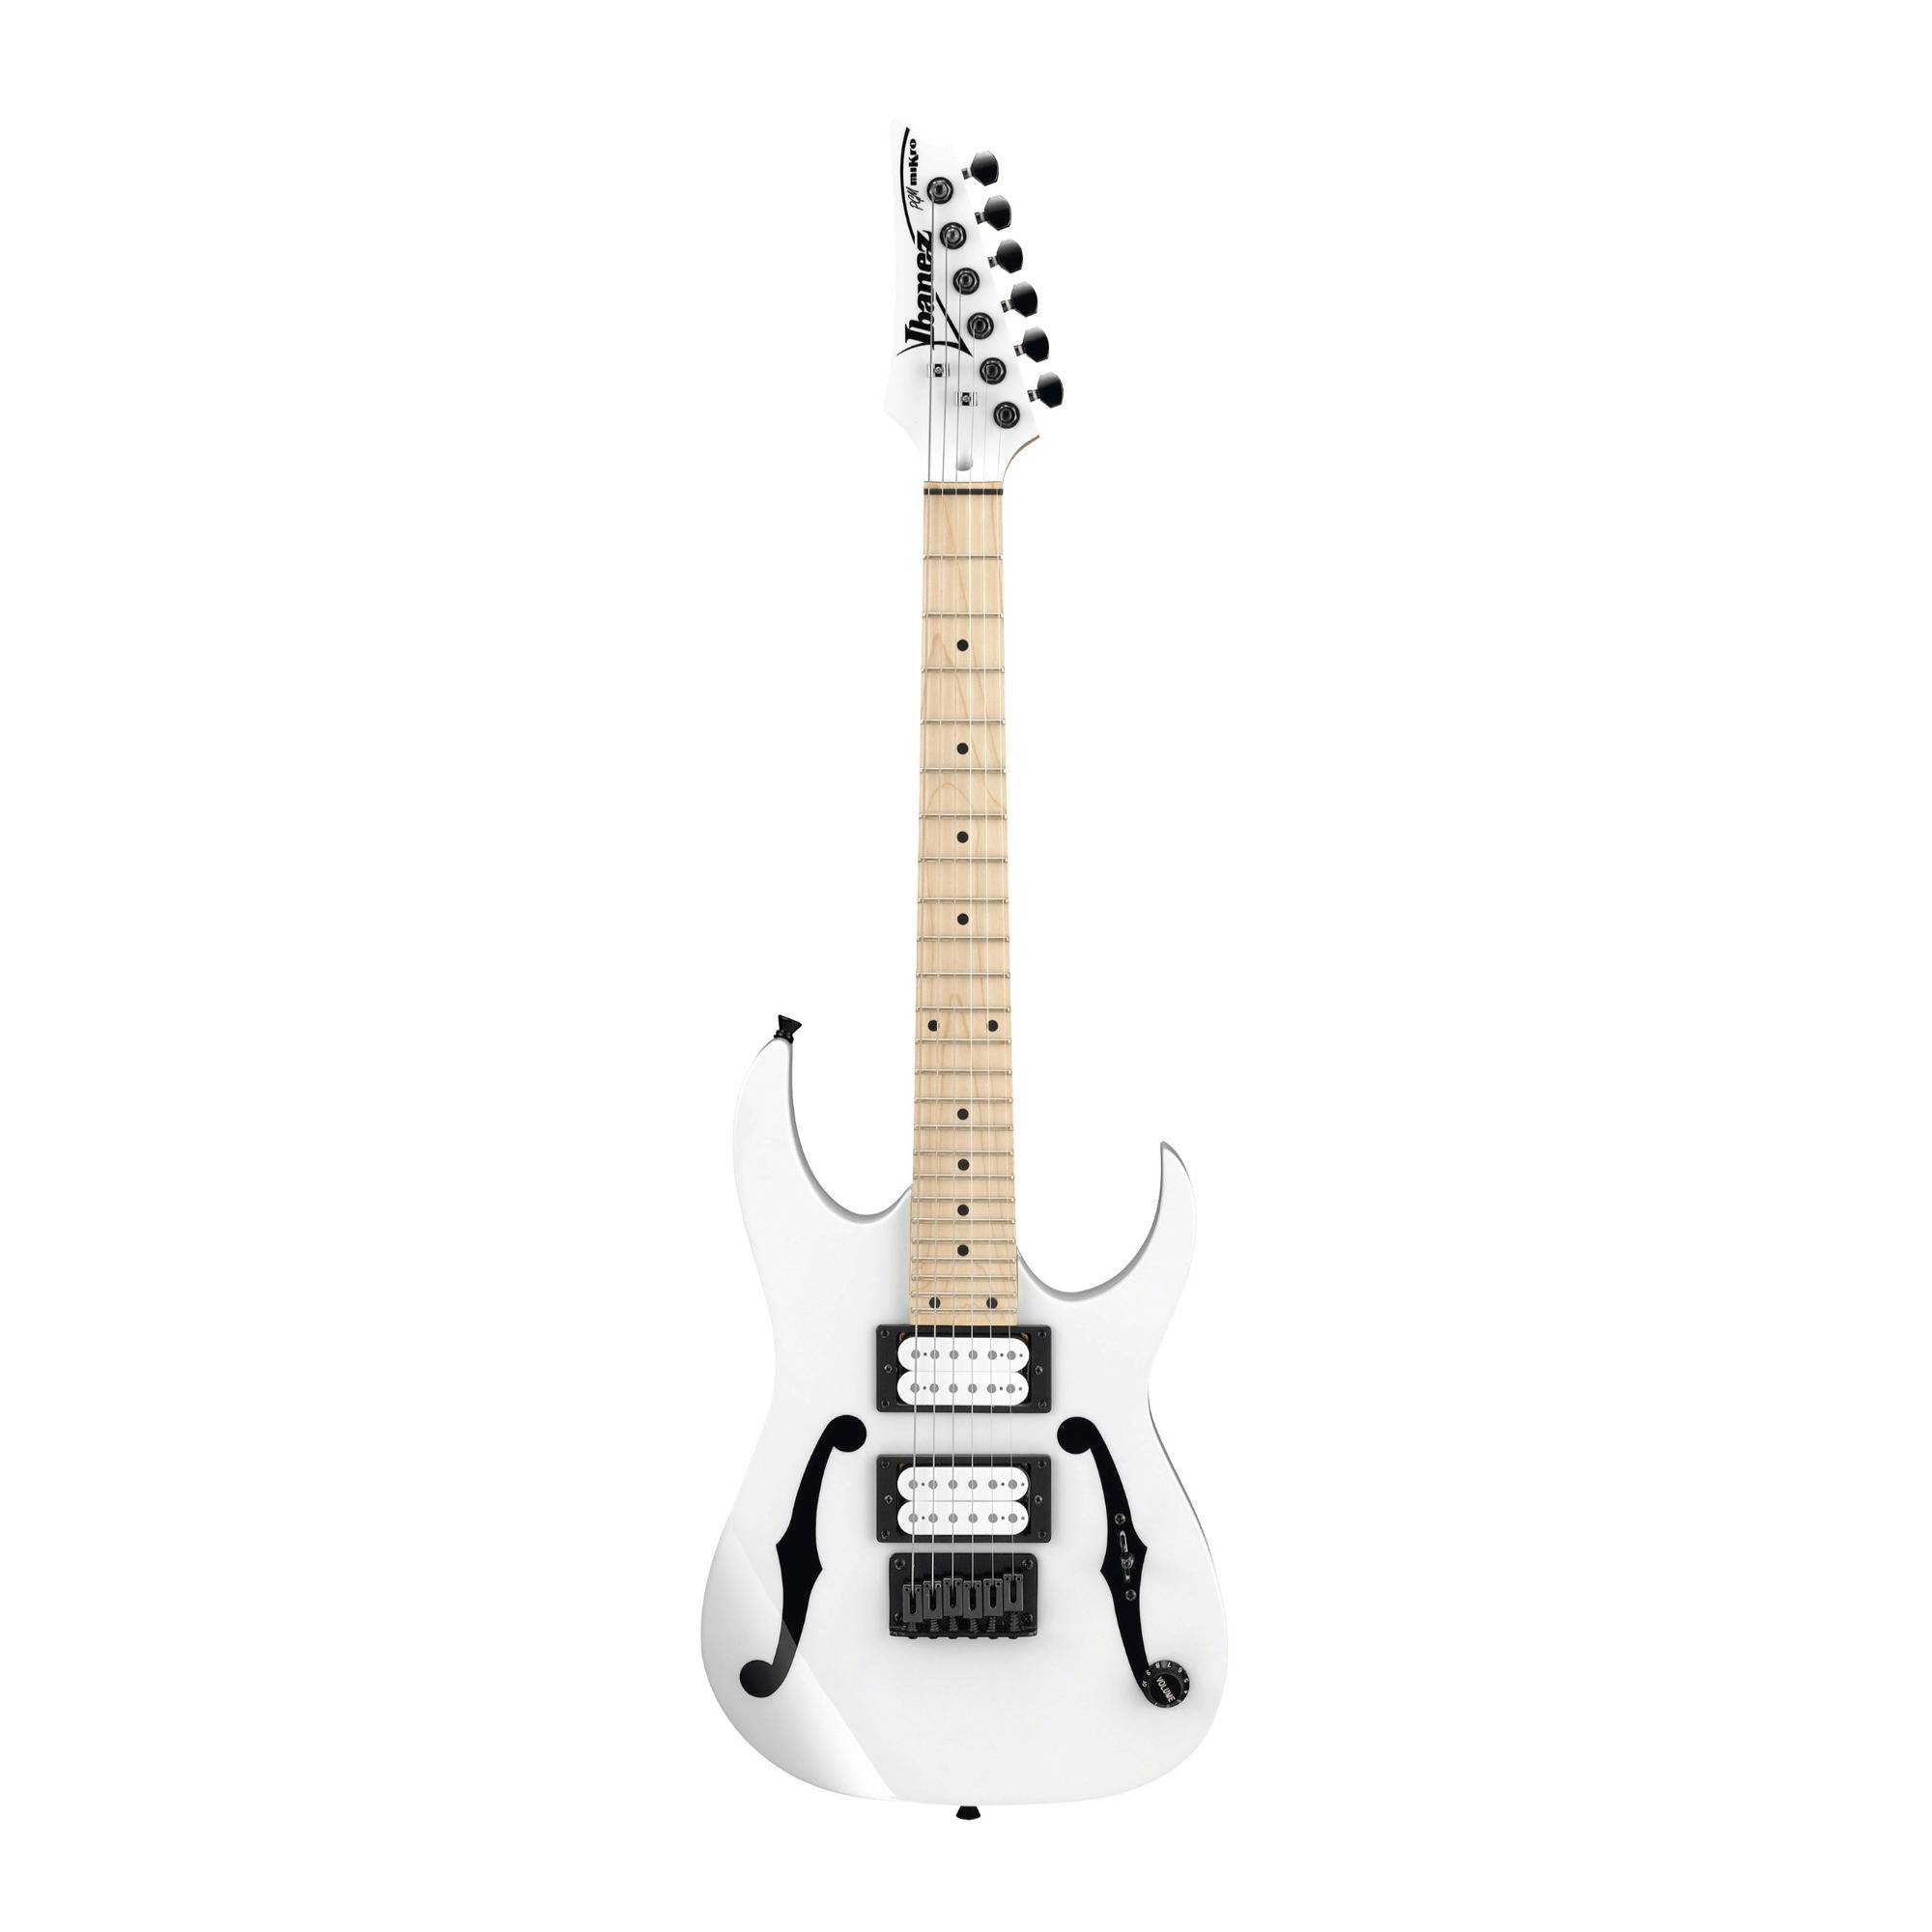 Ibanez Paul Gilbert Signature 6-String Electric Guitar (Right Hand, White)